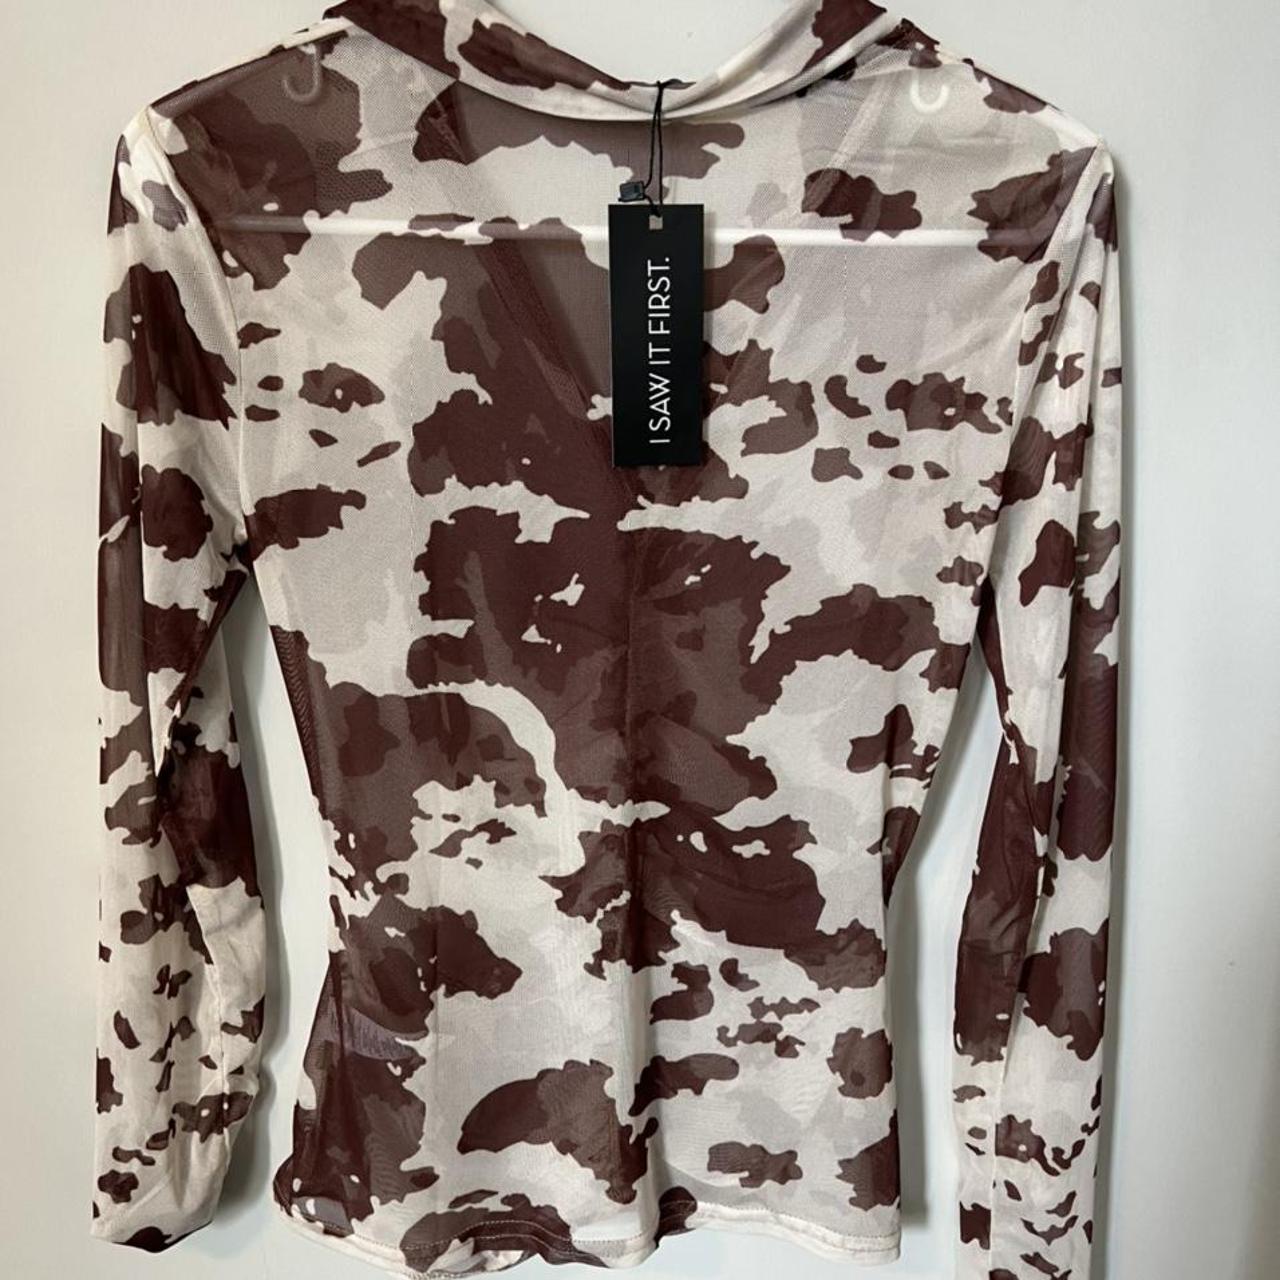 I Saw It First Women's Brown and Cream Shirt (2)